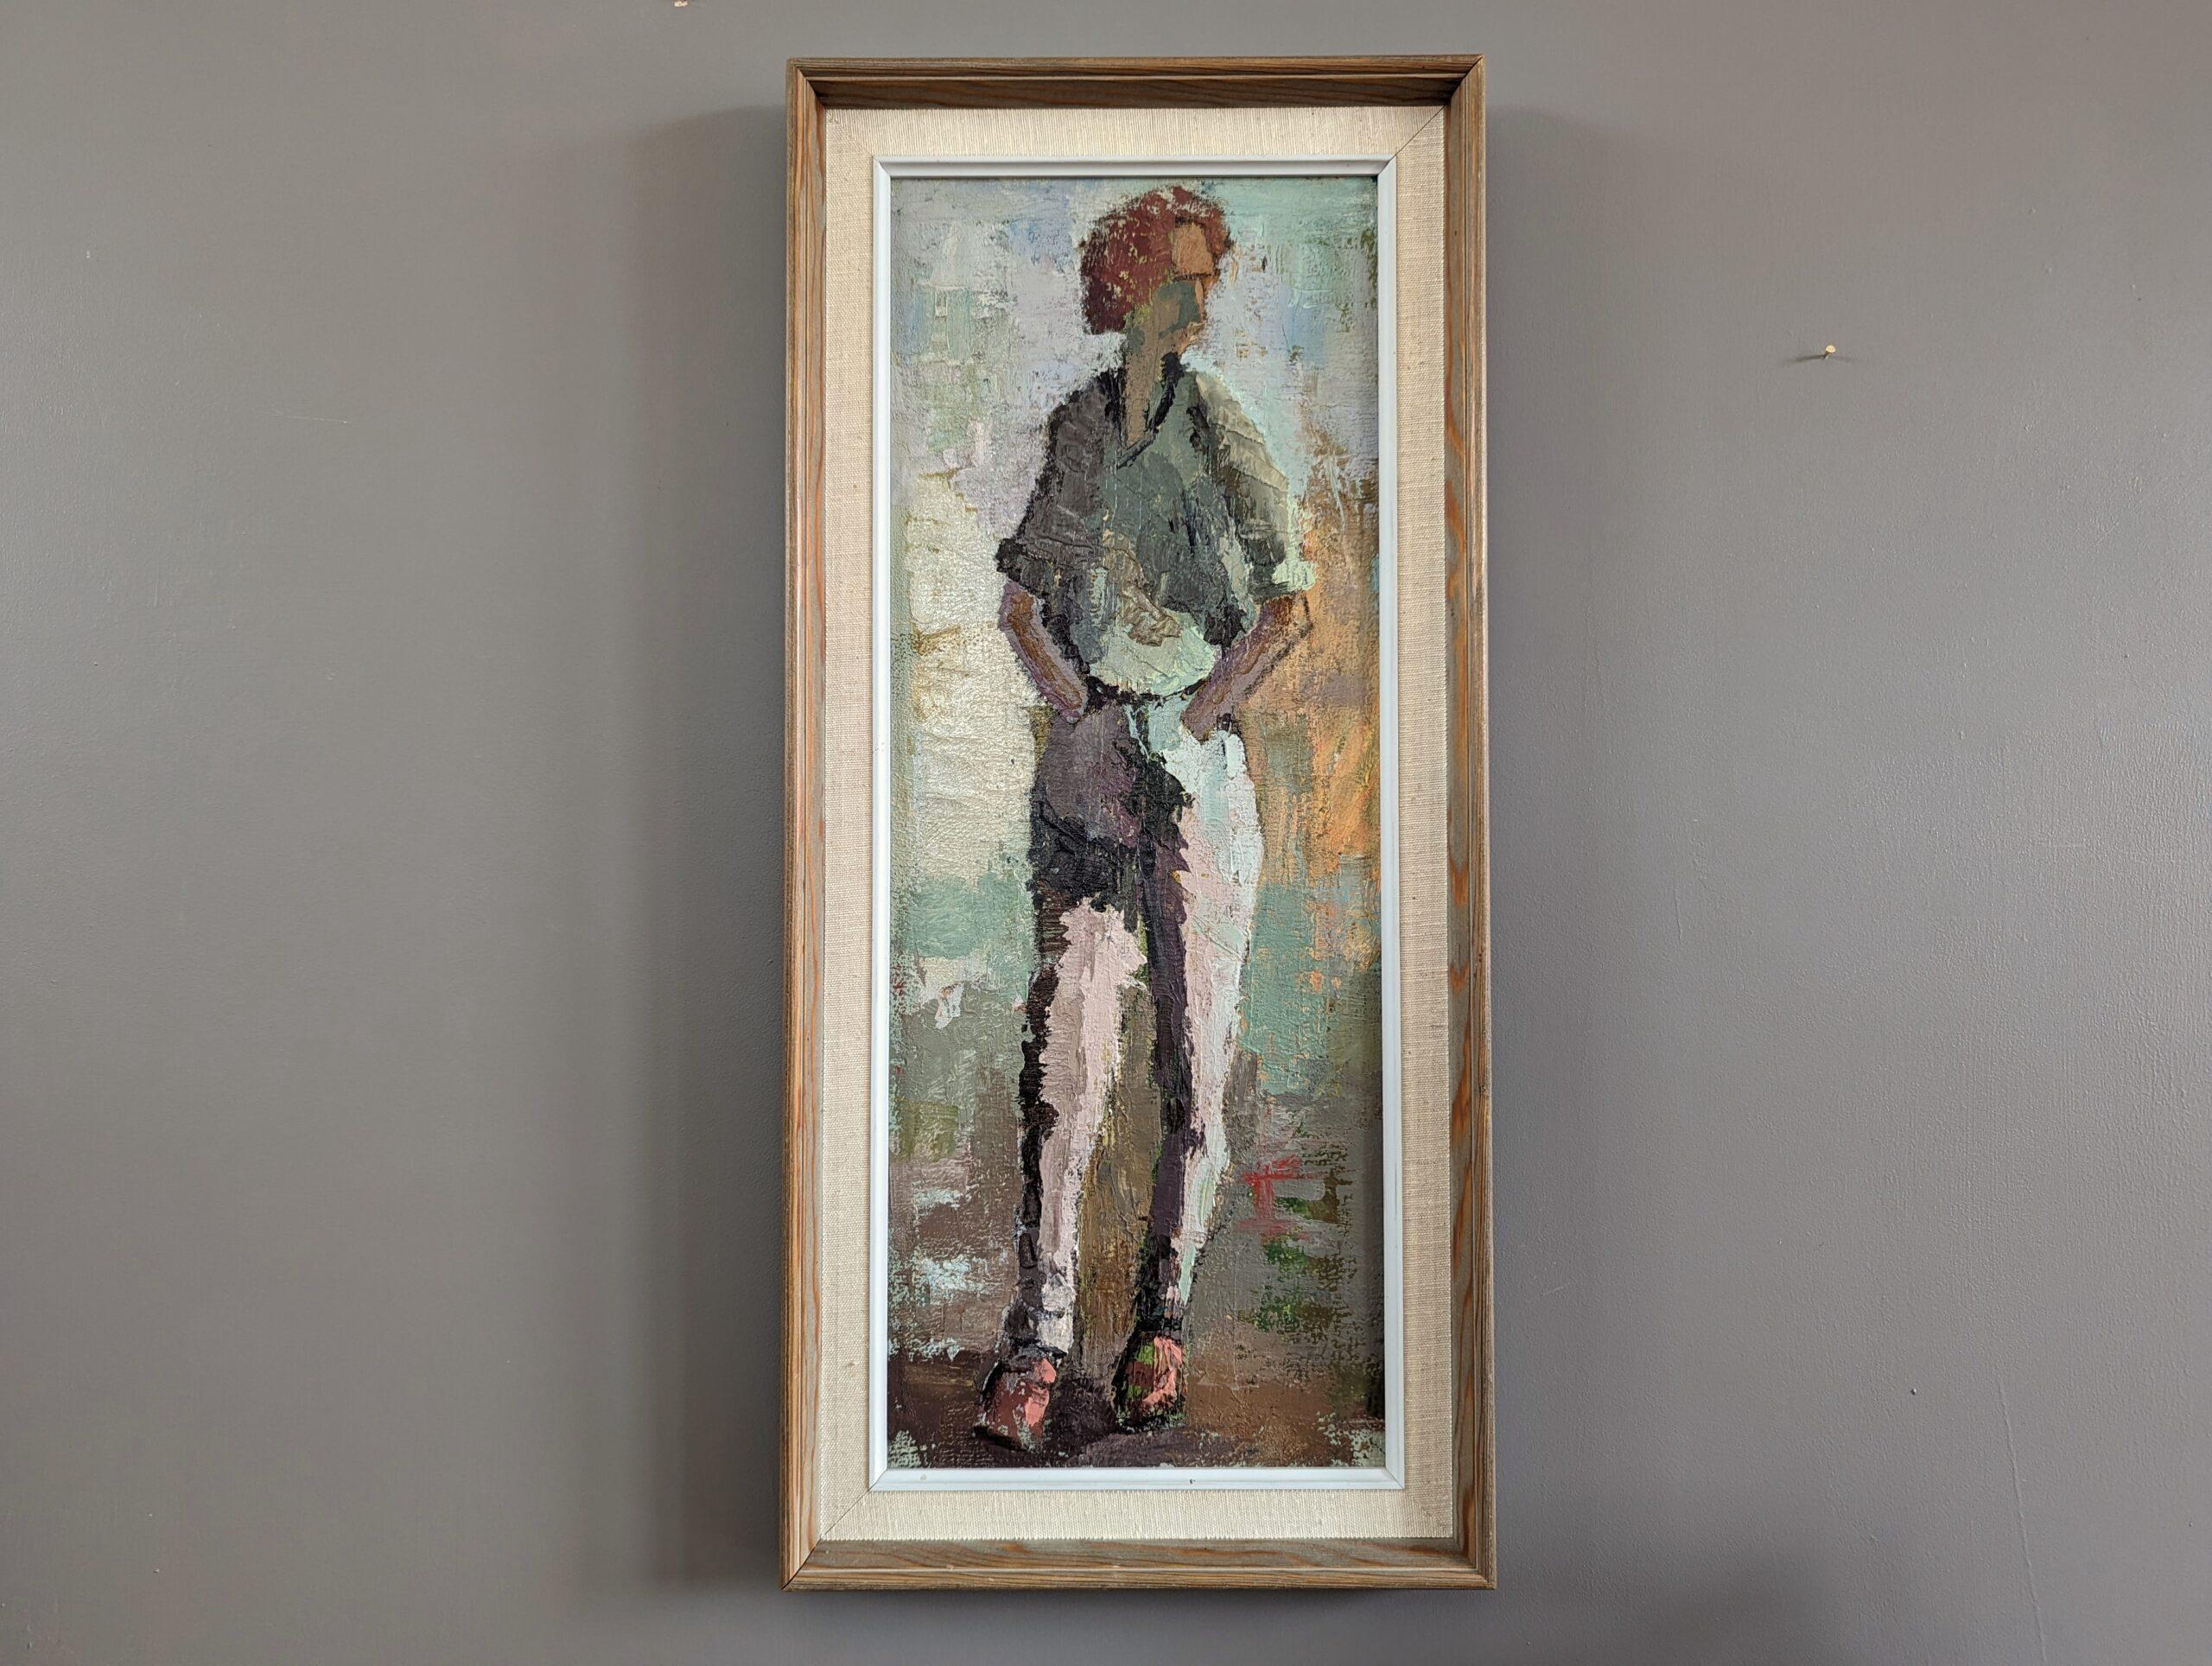 STANDING FIGURE IN PASTEL
Size: 56.5 x 26.5 cm (including frame)
Oil on Board

A wonderfully executed and textured mid-century portrait composition, painted in oil onto board.

The focal point of the painting is a figure standing upright, hands